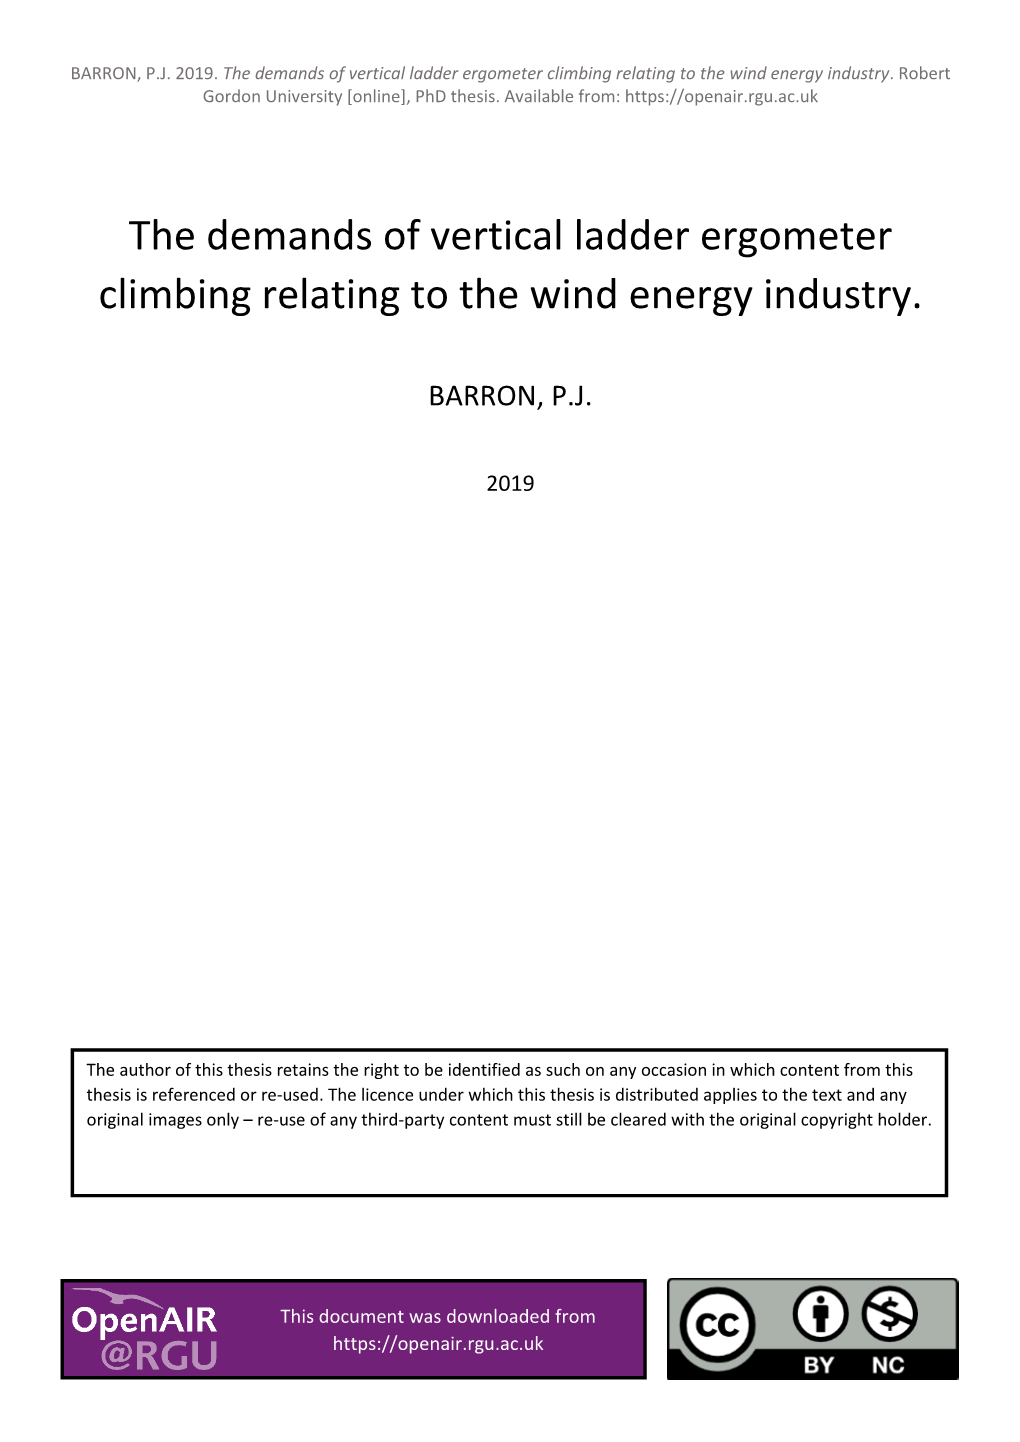 The Demands of Vertical Ladder Ergometer Climbing Relating to the Wind Energy Industry